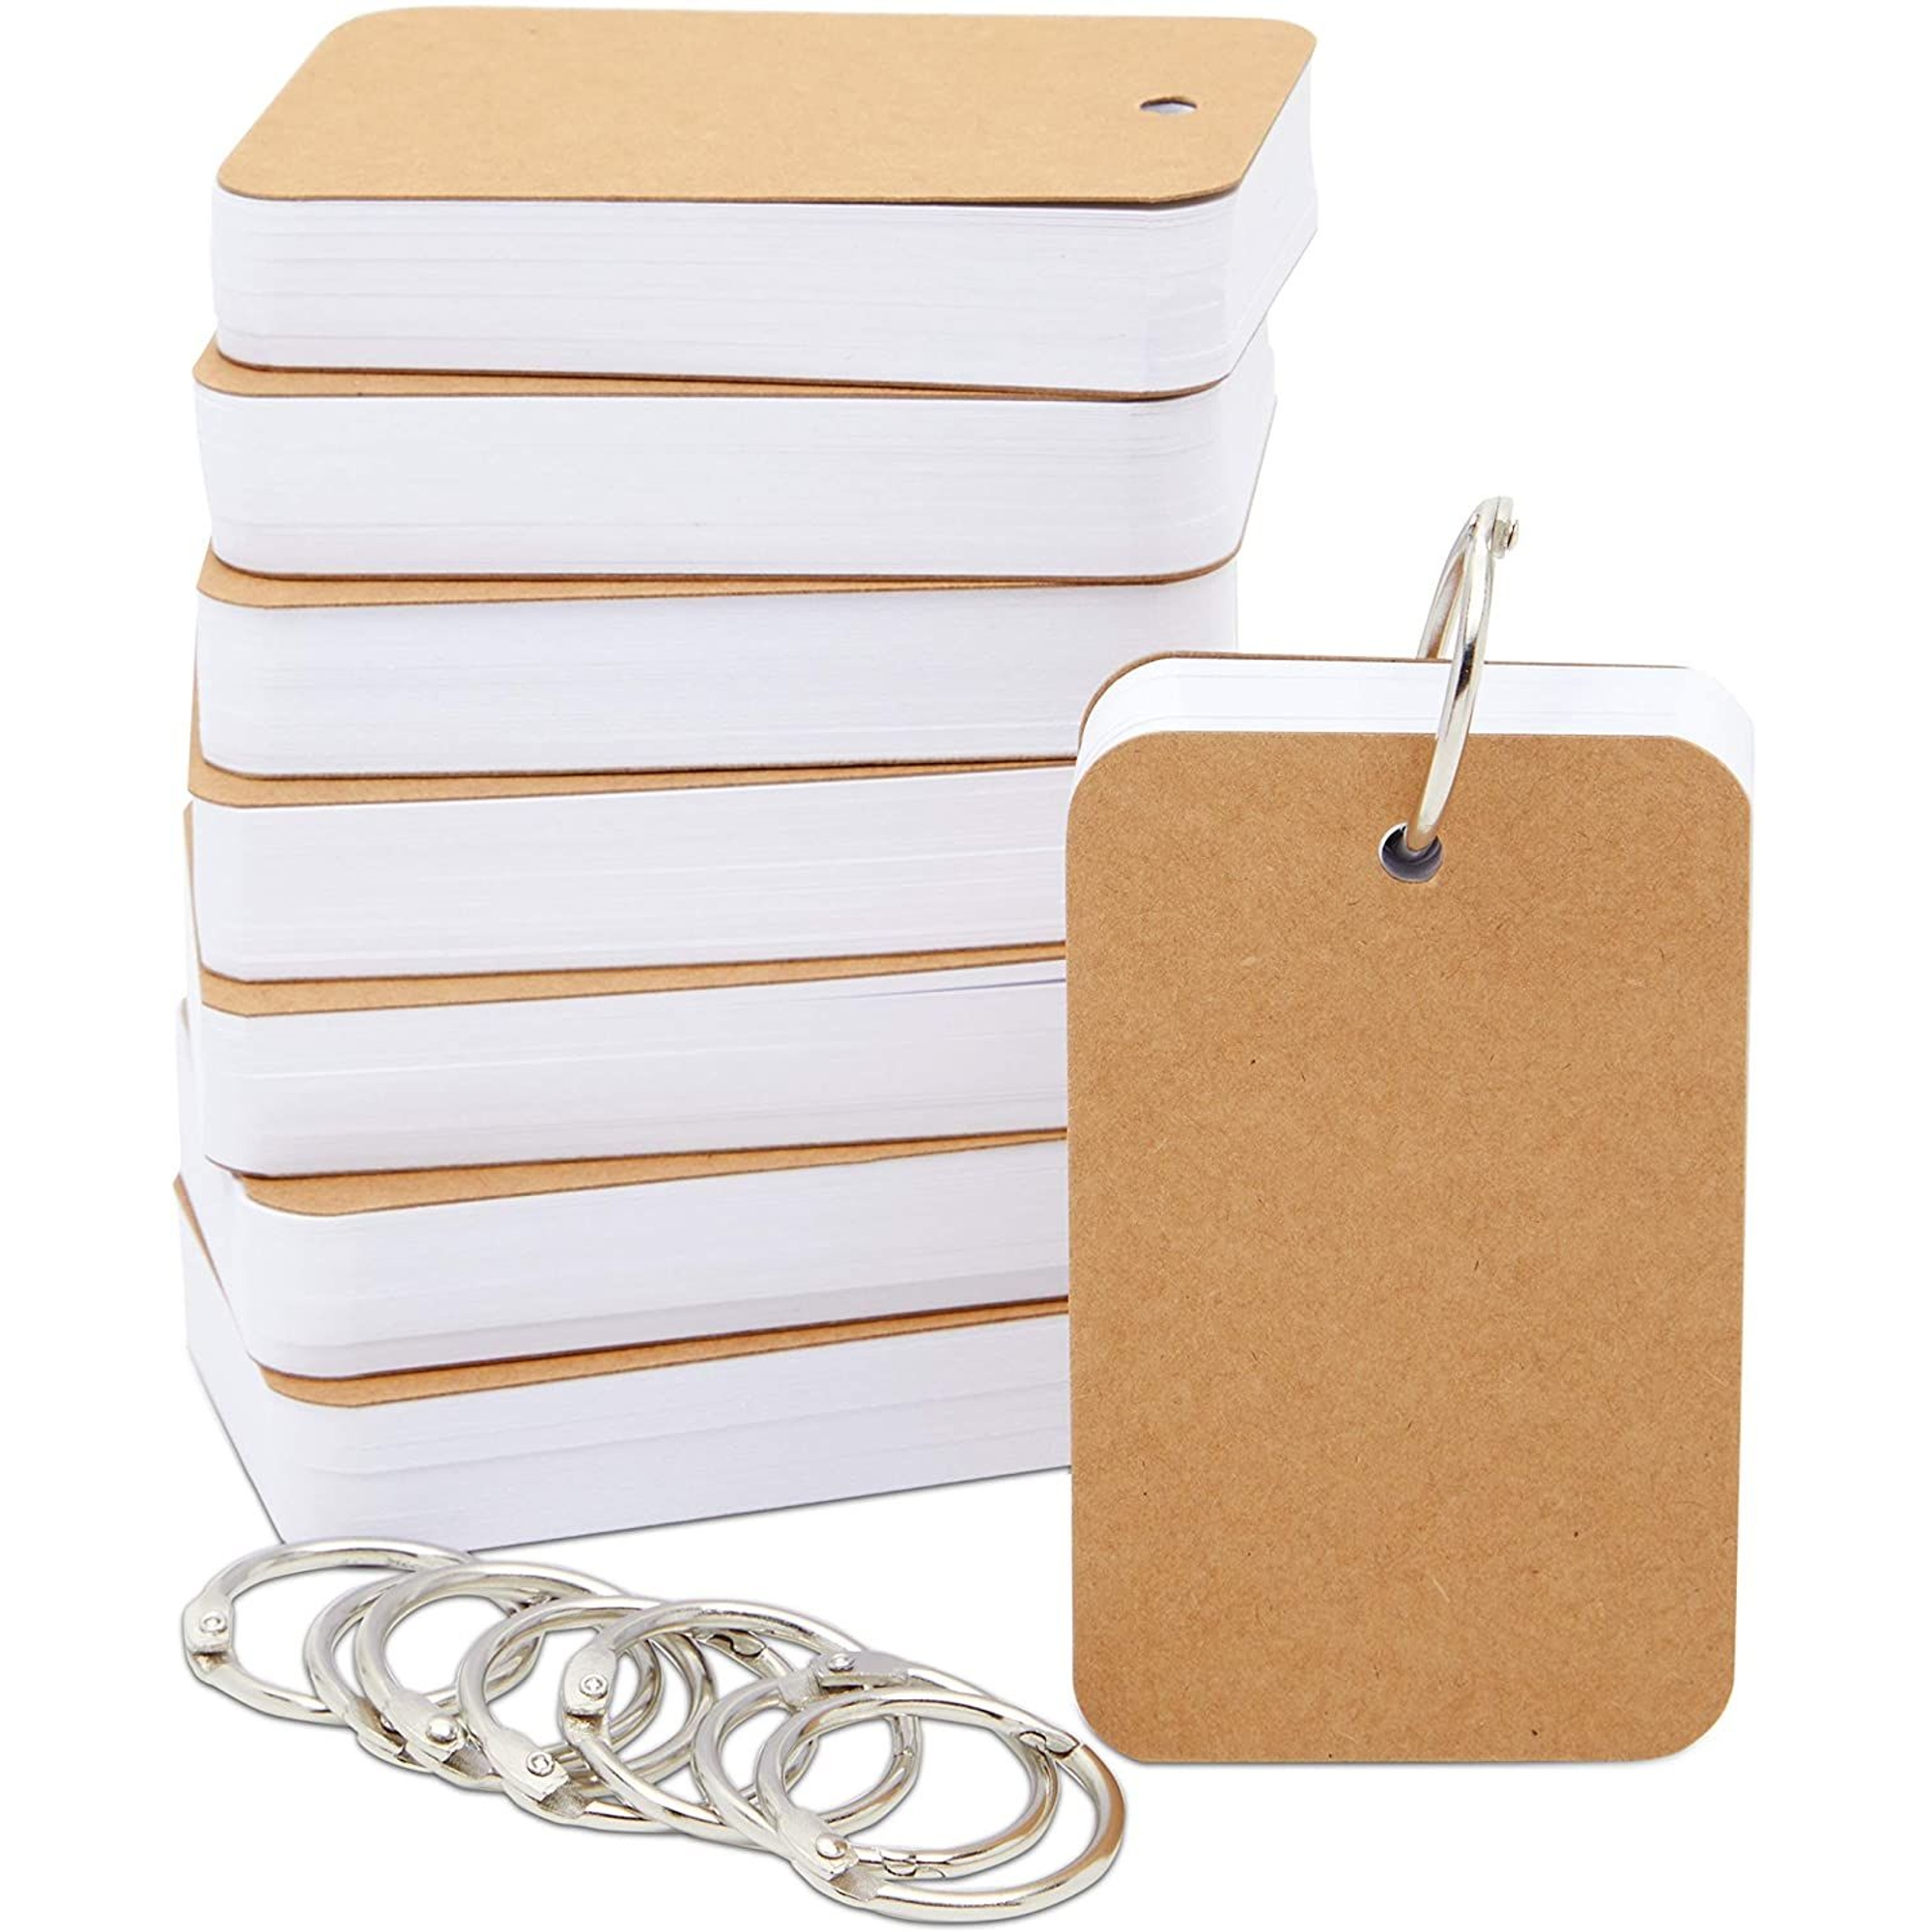 8 Pack Blank Flash Cards with Rings for Studying with 50 Sheets